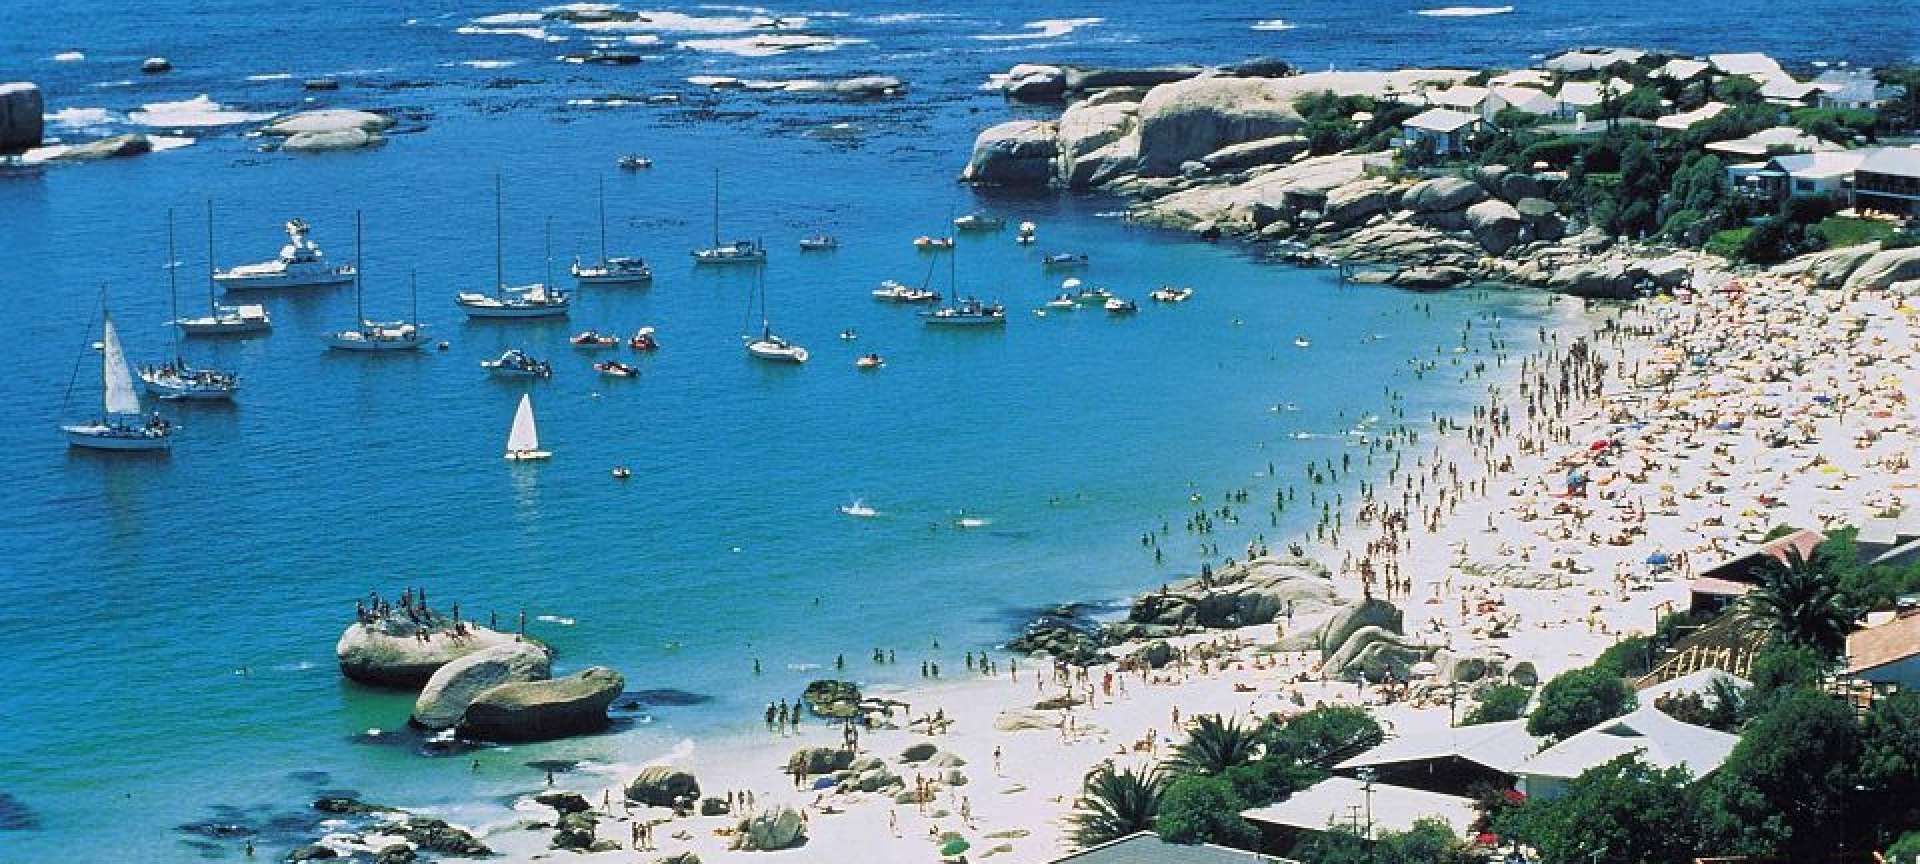 Camps Bay is consistently rated as the most luxurious and scenic in all of Cape Town.